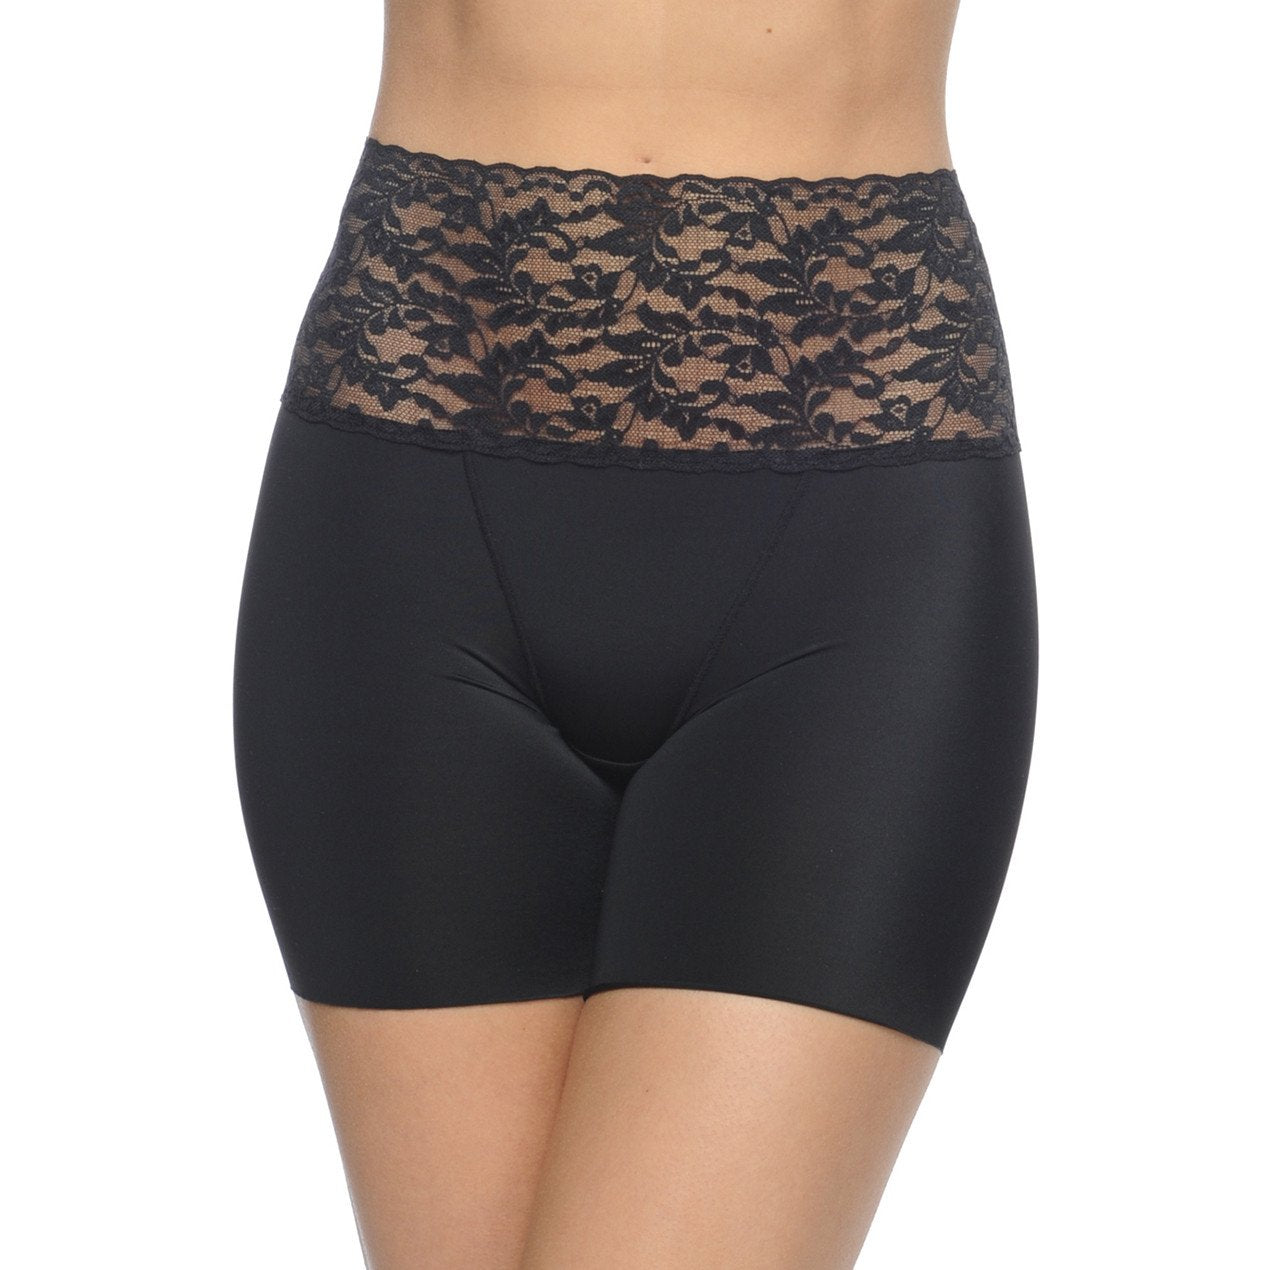 Boy Short Slimmer With Lace Waist Band Black